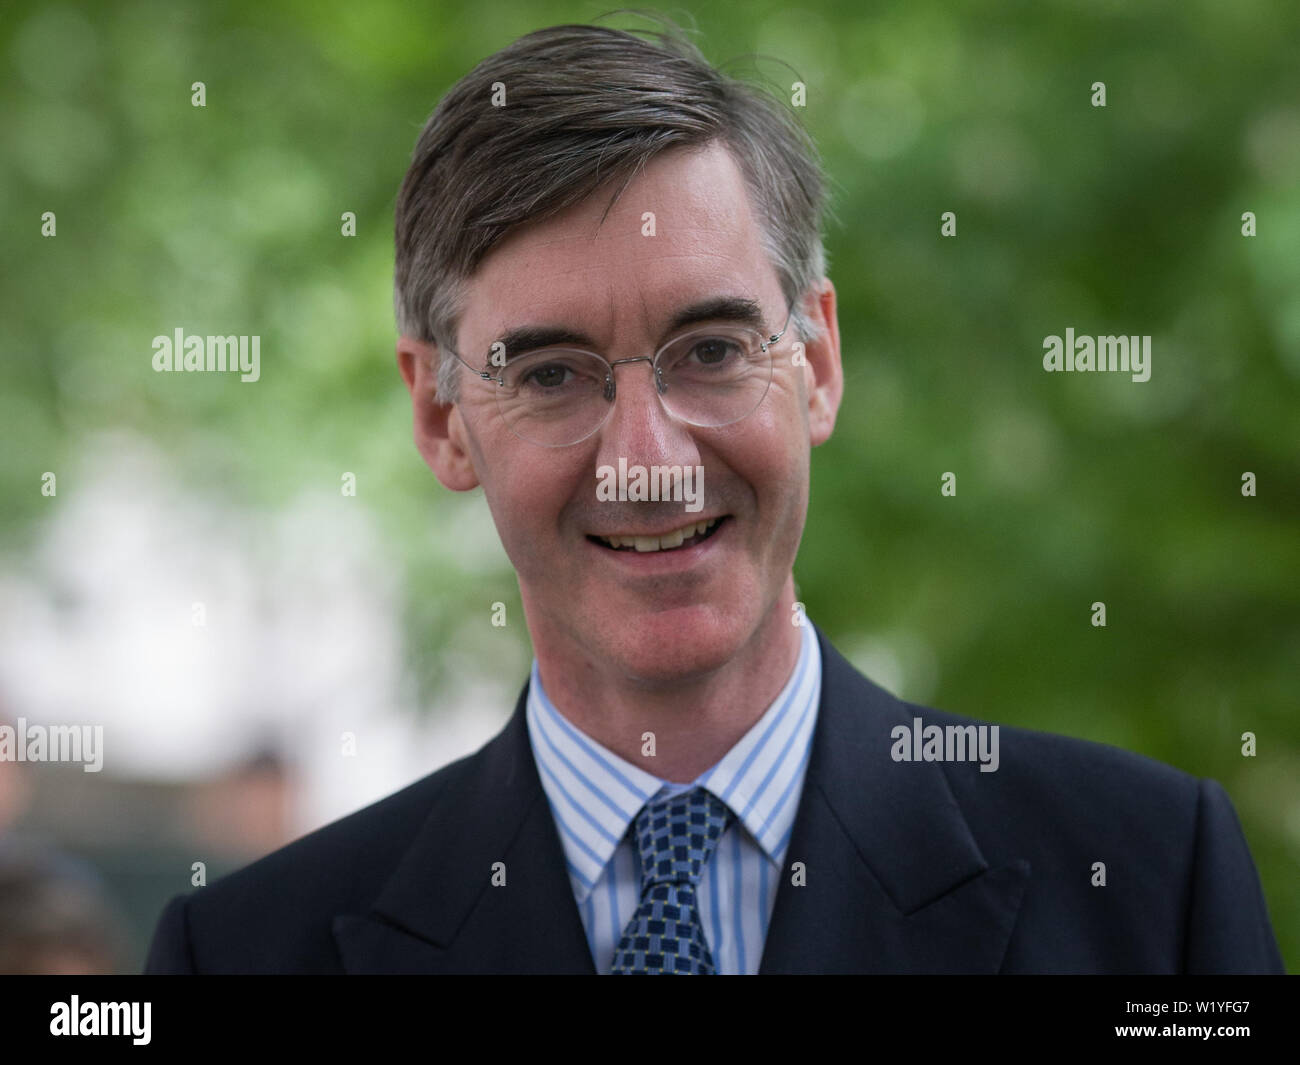 Jacob Rees-Mogg in St. James’s Park prior to Donald Trumps motorcade driving by, London, UK. Featuring: Jacob Rees-Mogg Where: London, United Kingdom When: 03 Jun 2019 Credit: Wheatley/WENN Stock Photo